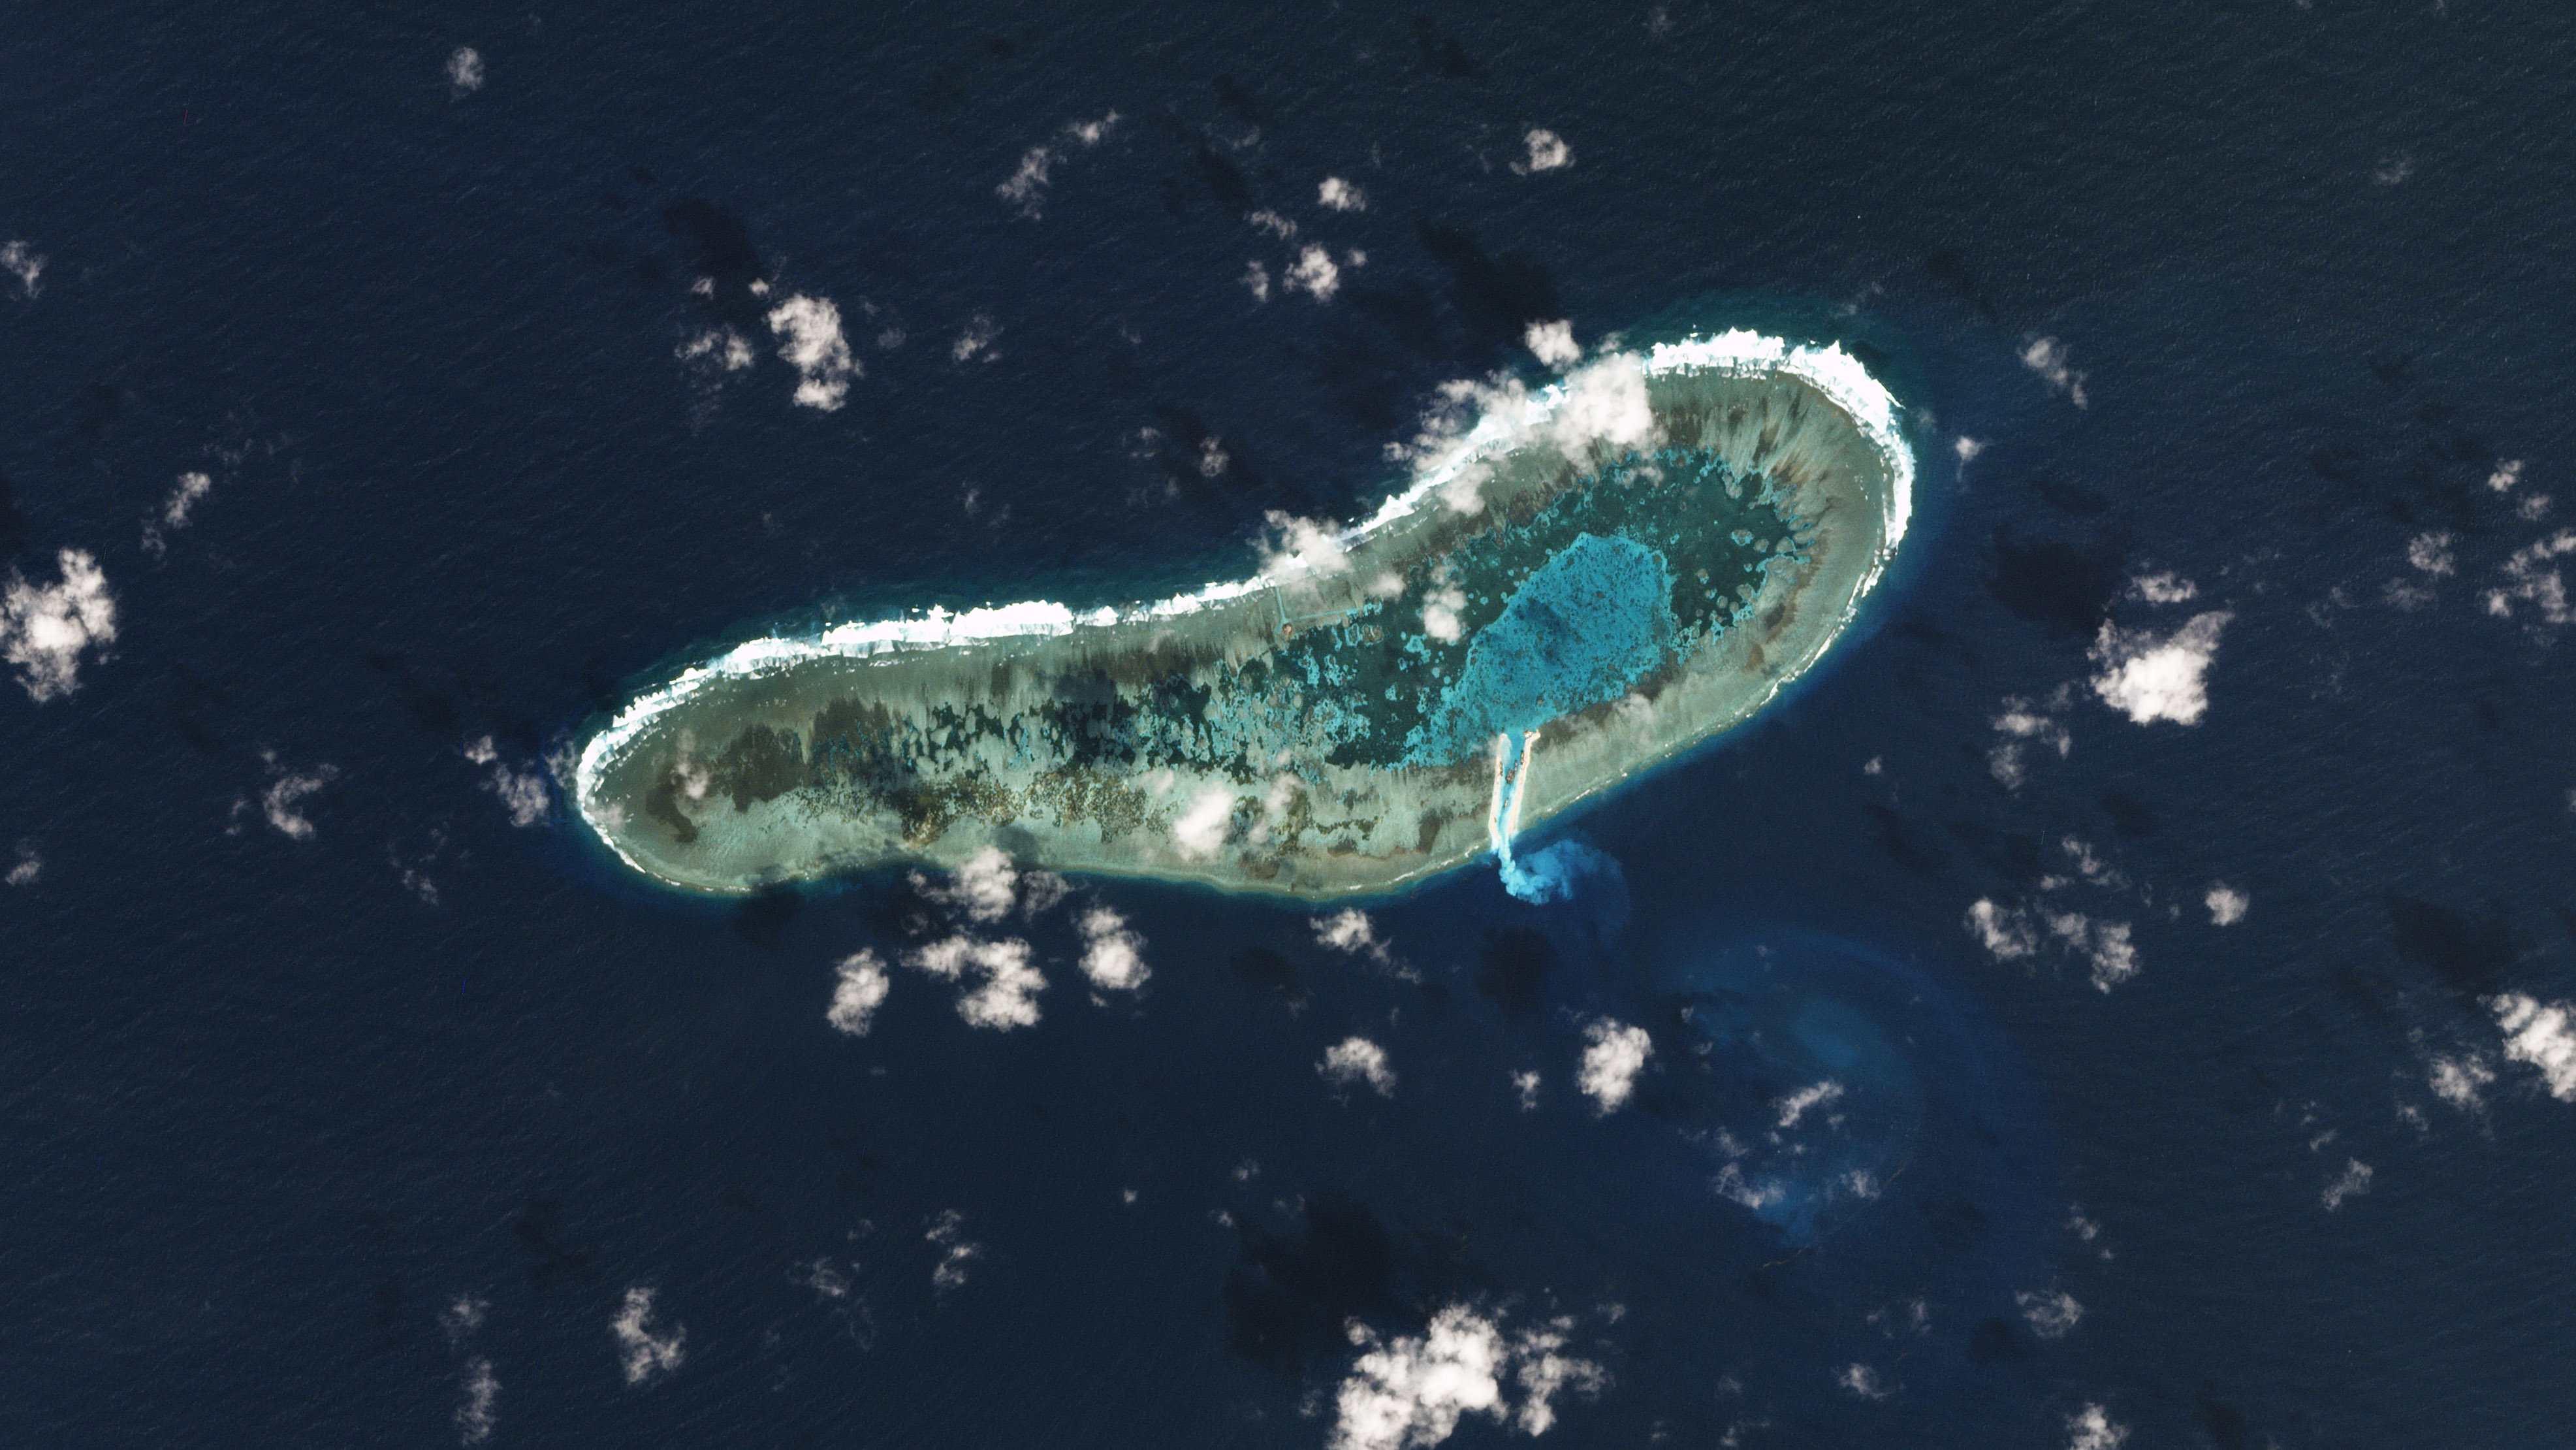 This satellite image taken on November 30, 2016 and released on December 9, 2016 by US-based Planet Labs shows dredging work (C below) on a small reef under Vietnamese control in the South China Sea. Vietnam has started dredging work on reef in the South China Sea, fresh satellite images appear to show, a move that could provoke Beijing which claims most of the disputed waterway. / AFP PHOTO / PLANET LABS / HO / RESTRICTED TO EDITORIAL USE - MANDATORY CREDIT "AFP PHOTO / PLANET LABS" - NO MARKETING NO ADVERTISING CAMPAIGNS - DISTRIBUTED AS A SERVICE TO CLIENTS == NO ARCHIVE